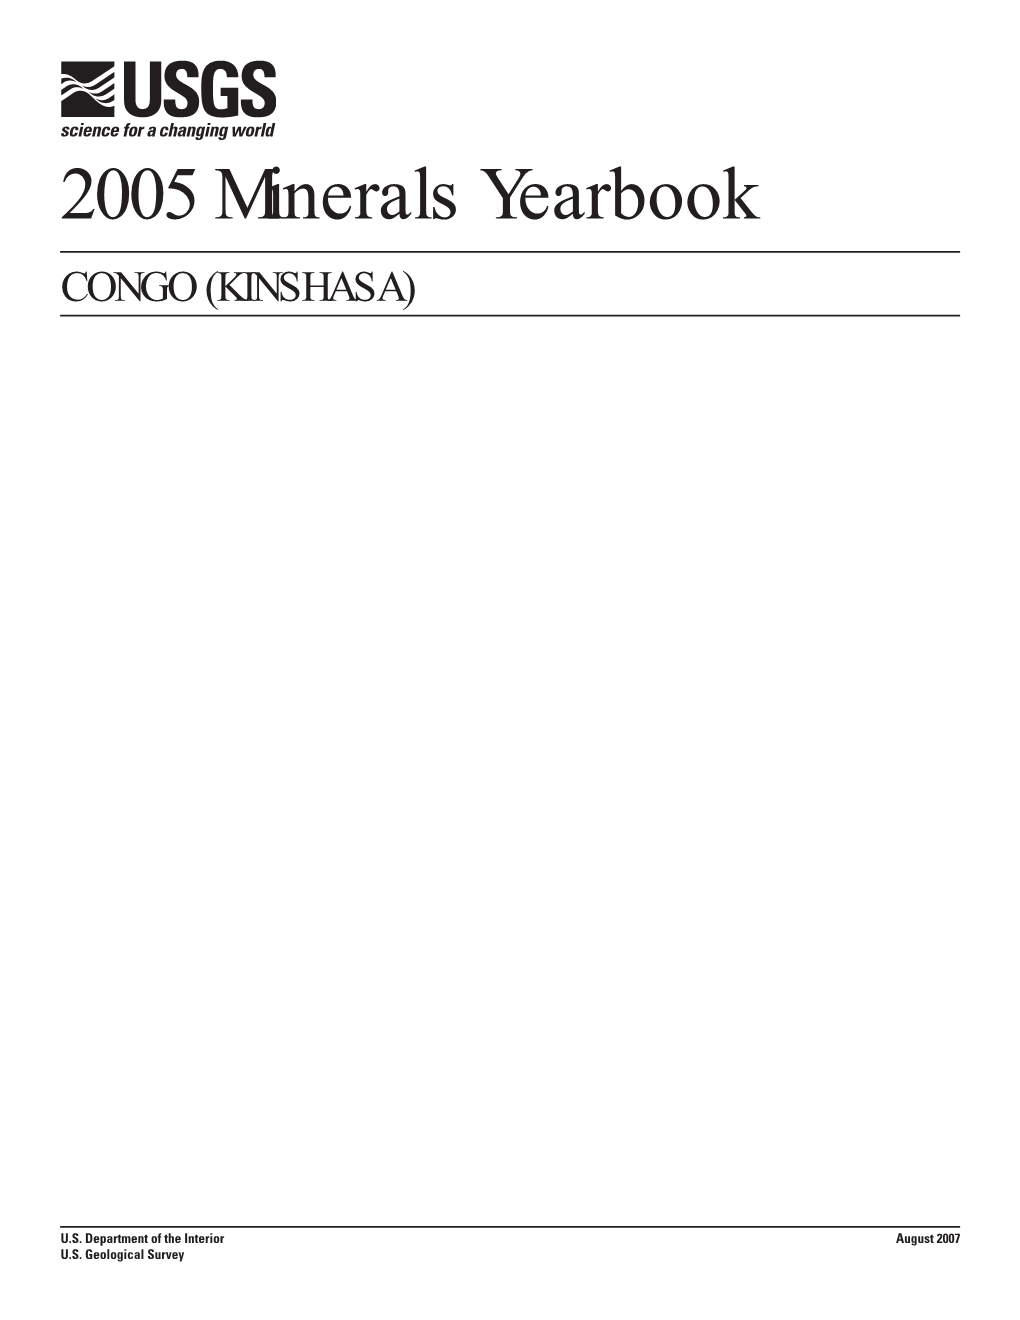 The Mineral Industry of Congo (Kinshasa) in 2005